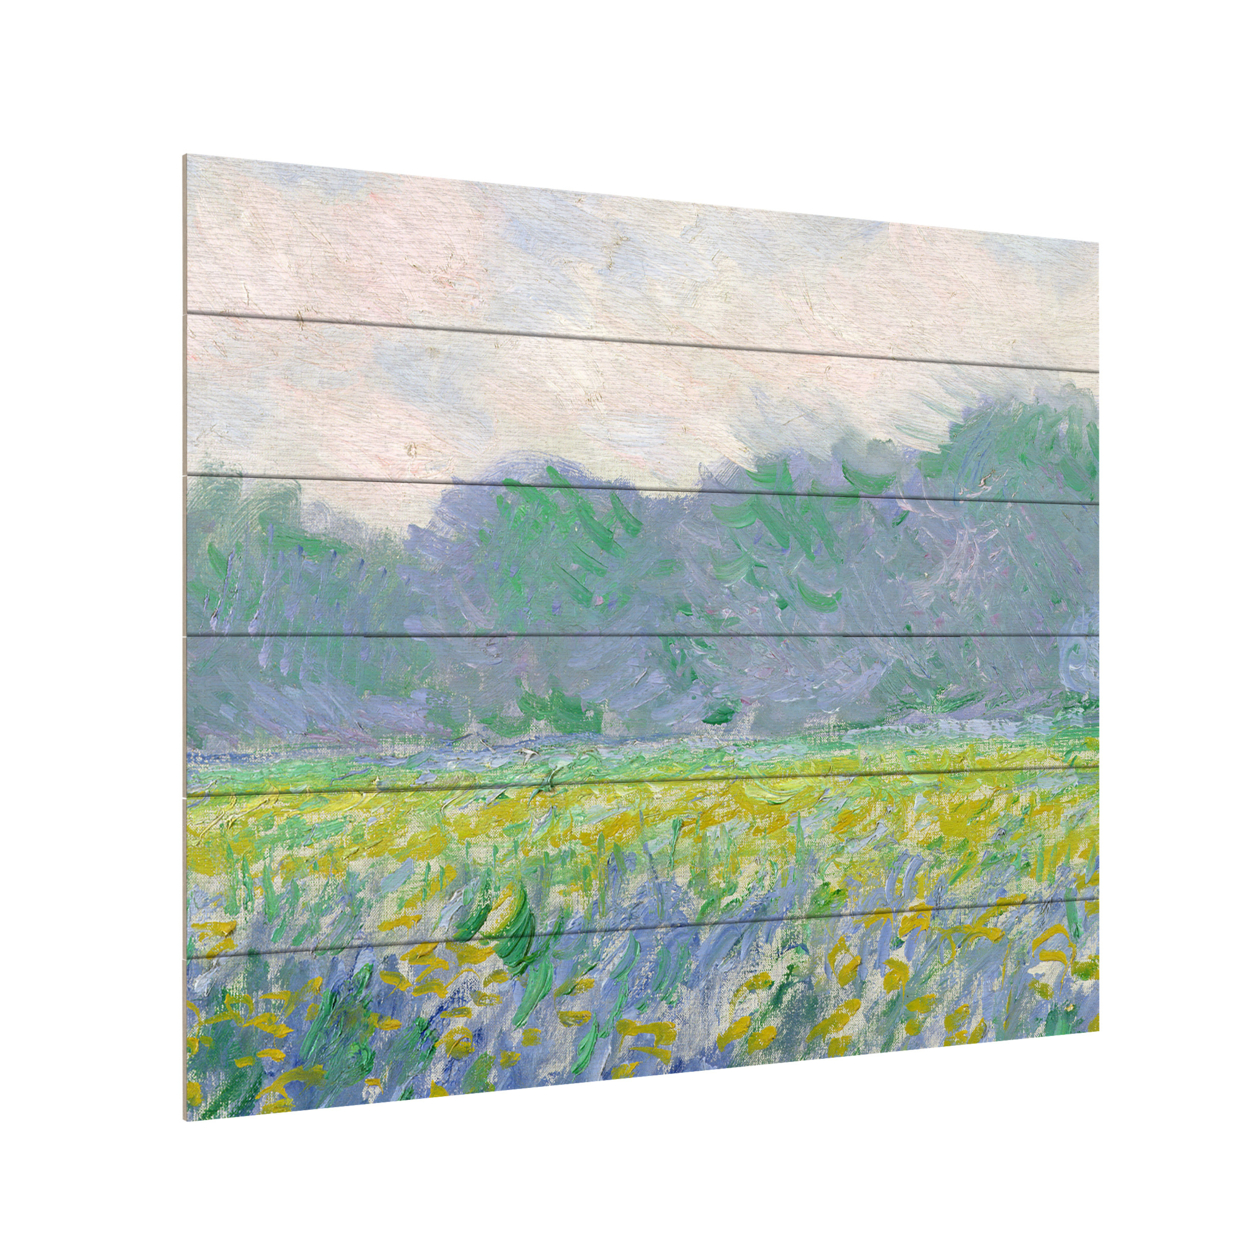 Wooden Slat Art 18 X 22 Inches Titled Field Of Yellow Irises Ready To Hang Home Decor Picture